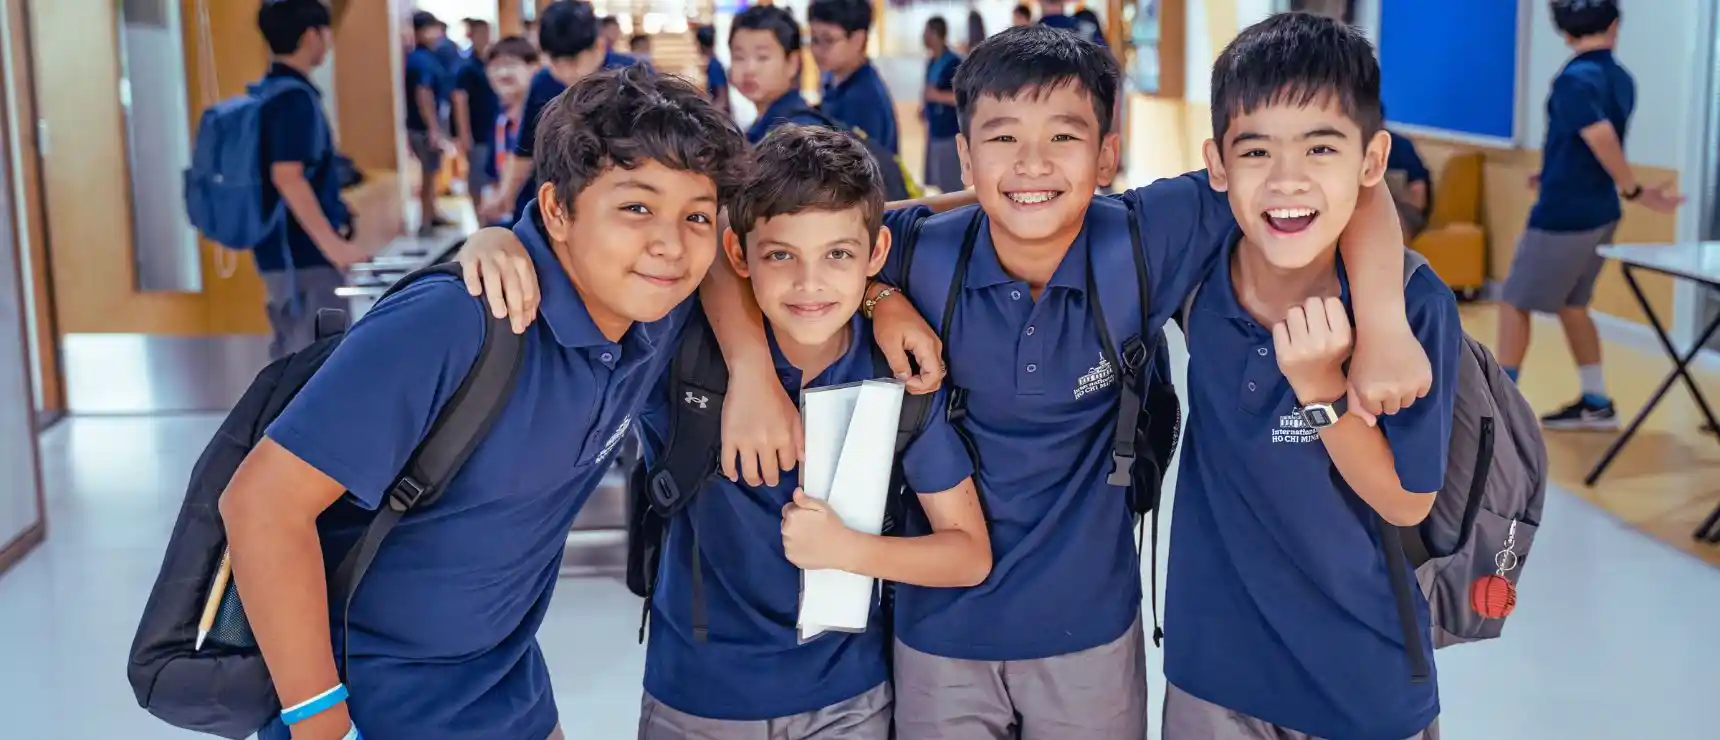 5 Things to Consider When Choosing an International School in HCMC - 2 5 Things to Consider When Choosing an International School in HCMC - 2 5 Things to Consider When Choosing an International School in HCMC